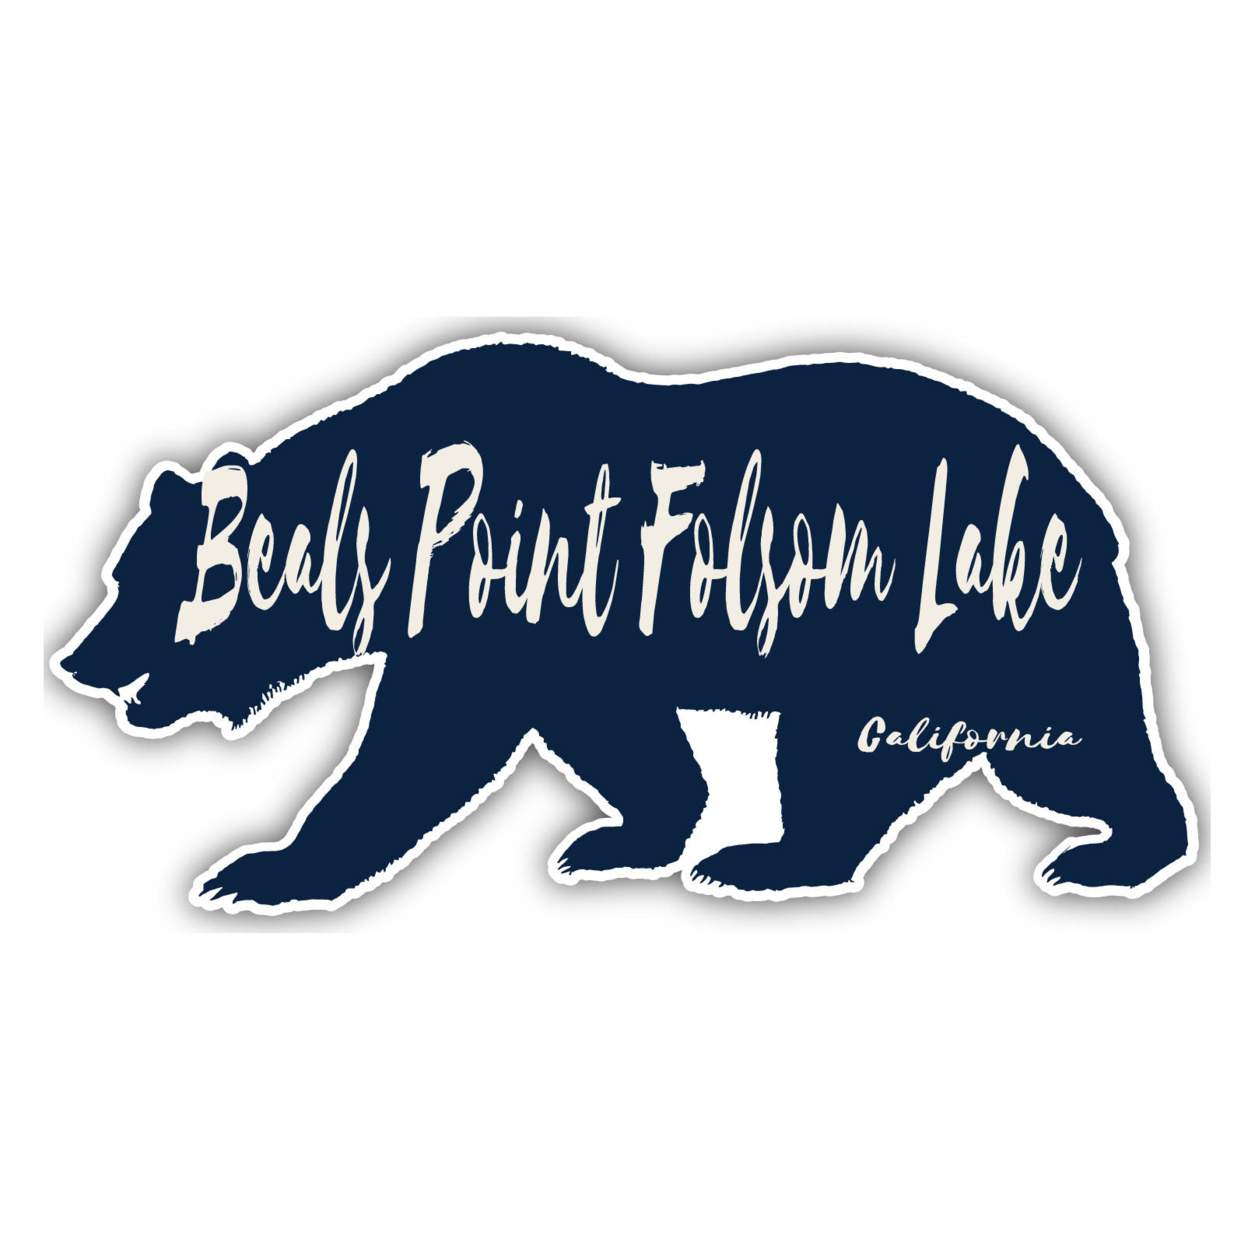 Beals Point Folsom Lake California Souvenir Decorative Stickers (Choose Theme And Size) - Single Unit, 2-Inch, Camp Life